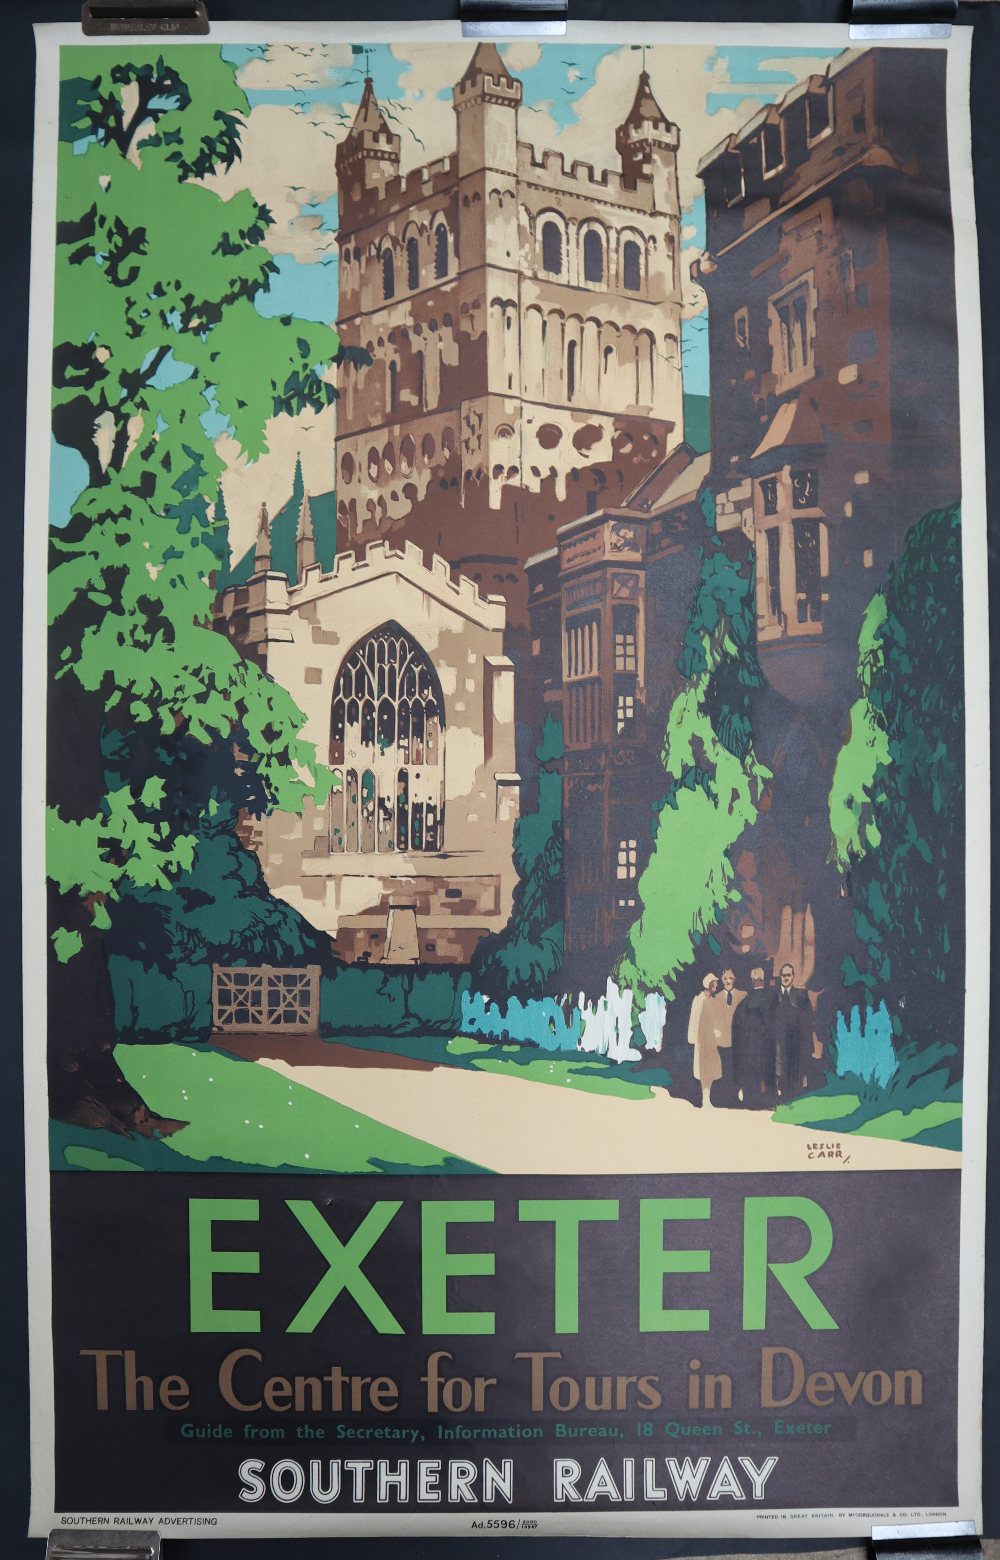 After Leslie Carr (1891-1969) Exeter The Centre for Tours in Devon Southern Railways Travel Poster - Image 2 of 2